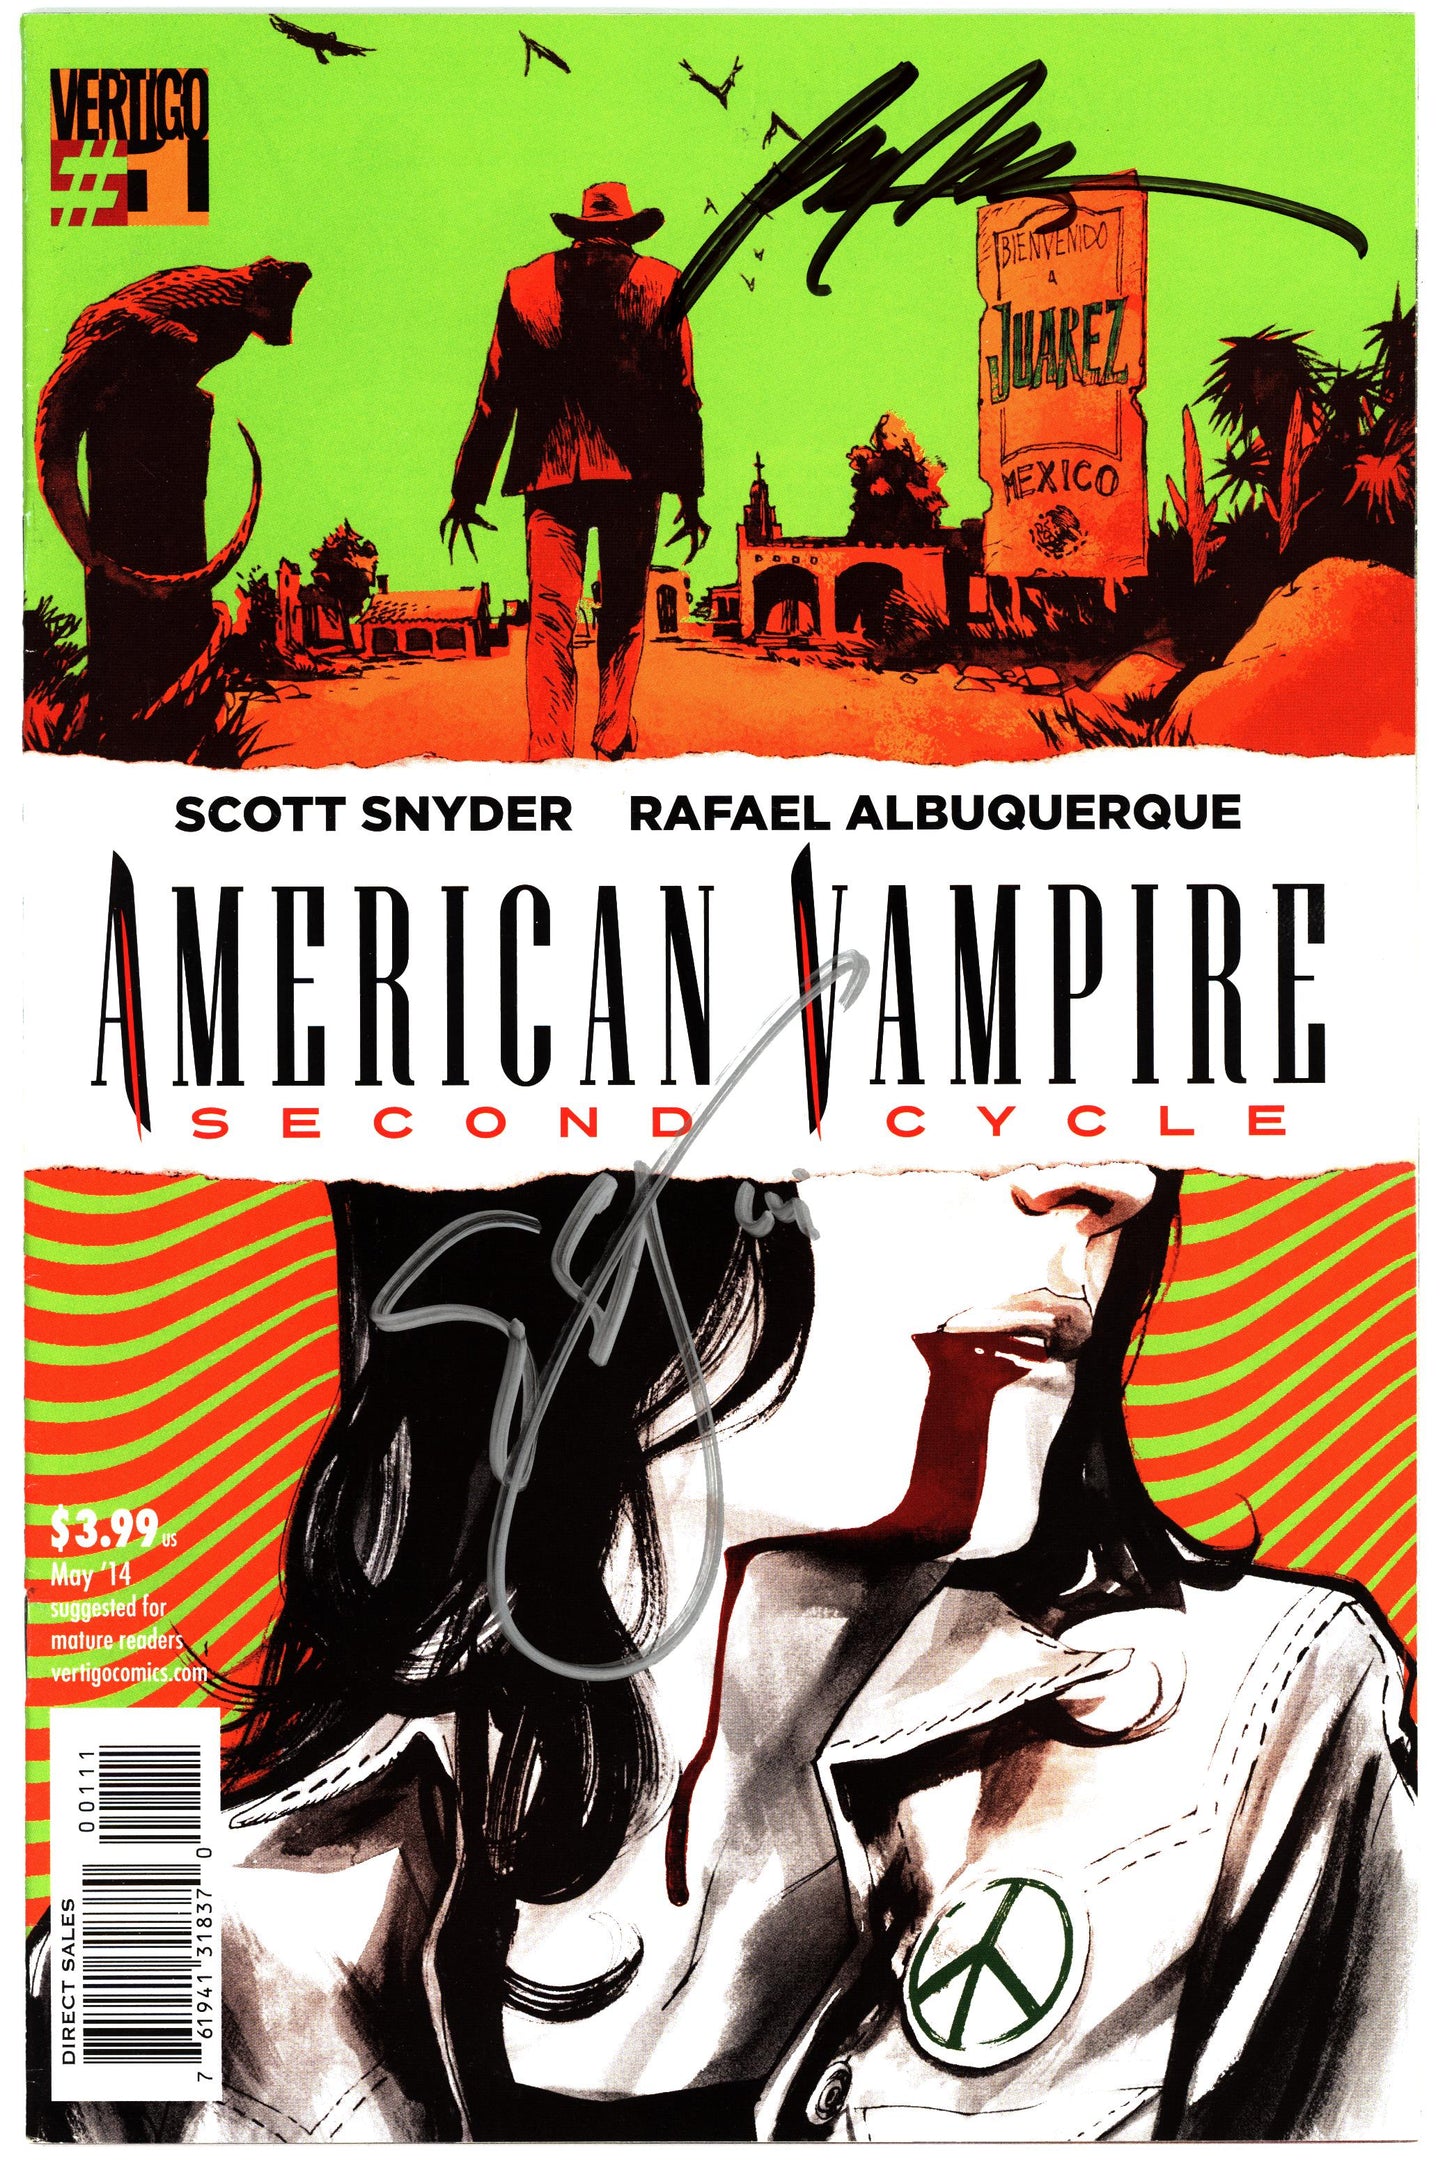 American Vampire Second Cycle #1 - 2x Signed